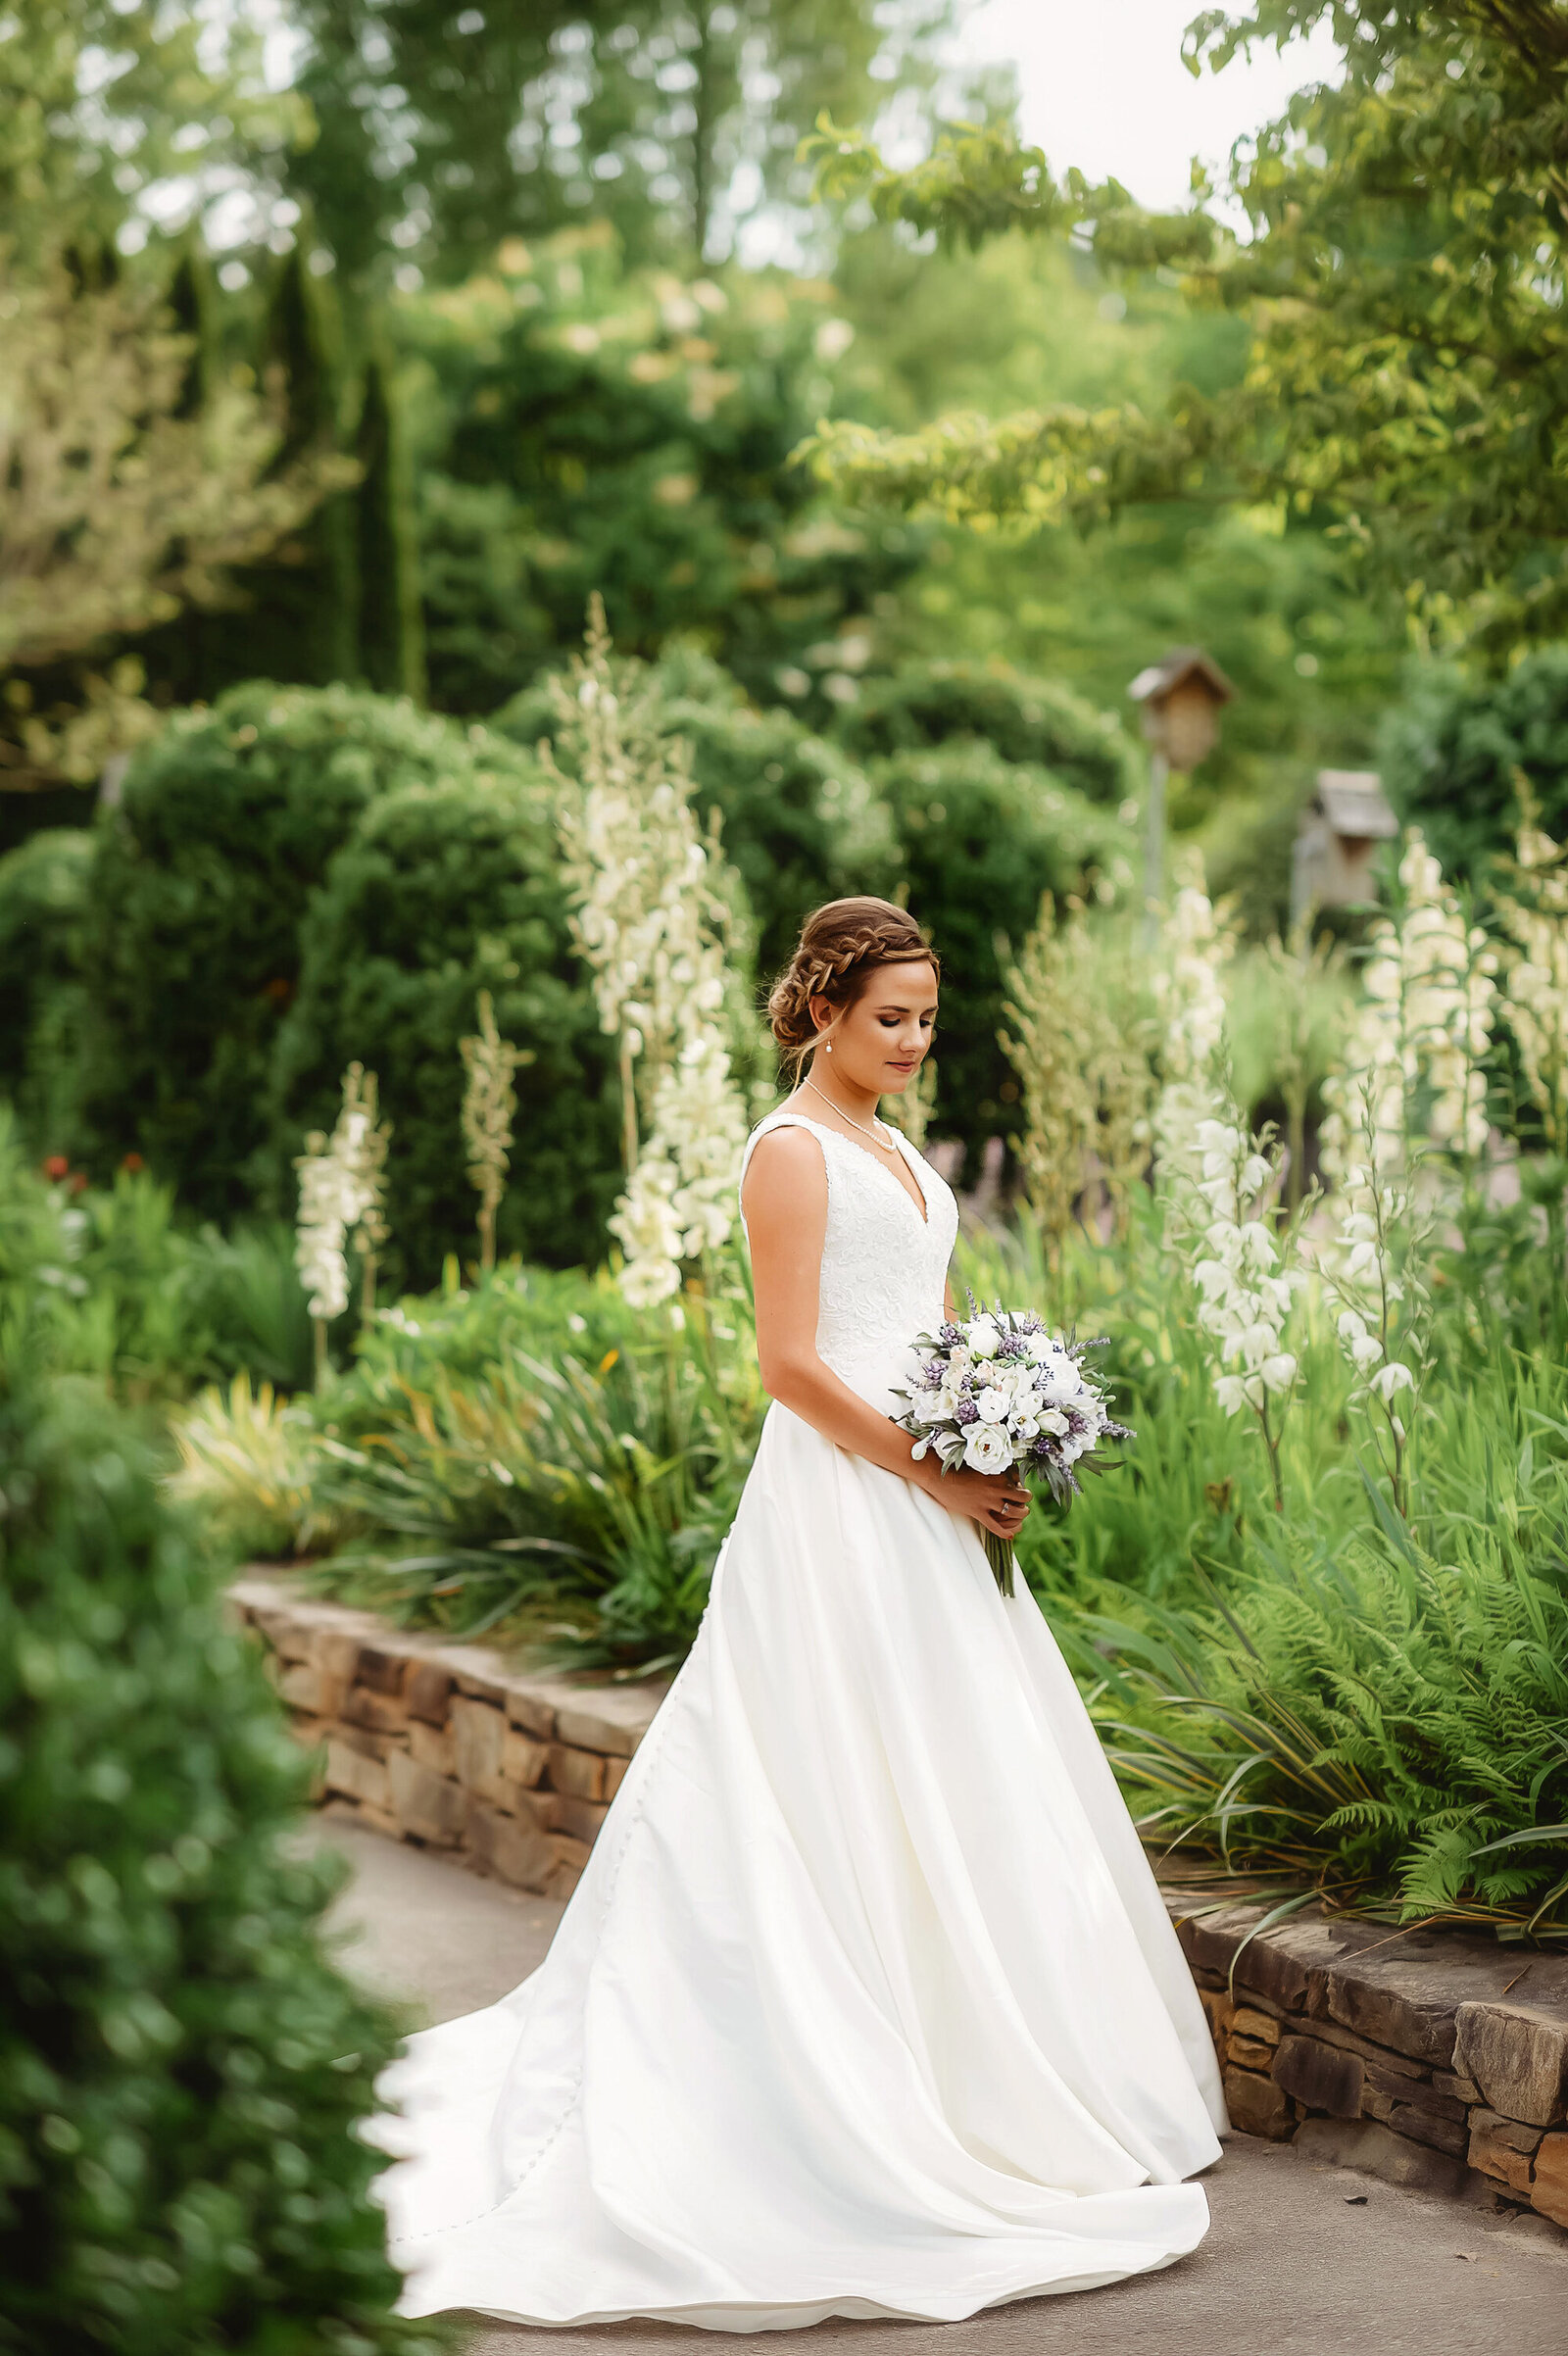 Bride poses for Bridal Portraits at The NC Arboretum in Asheville, NC.